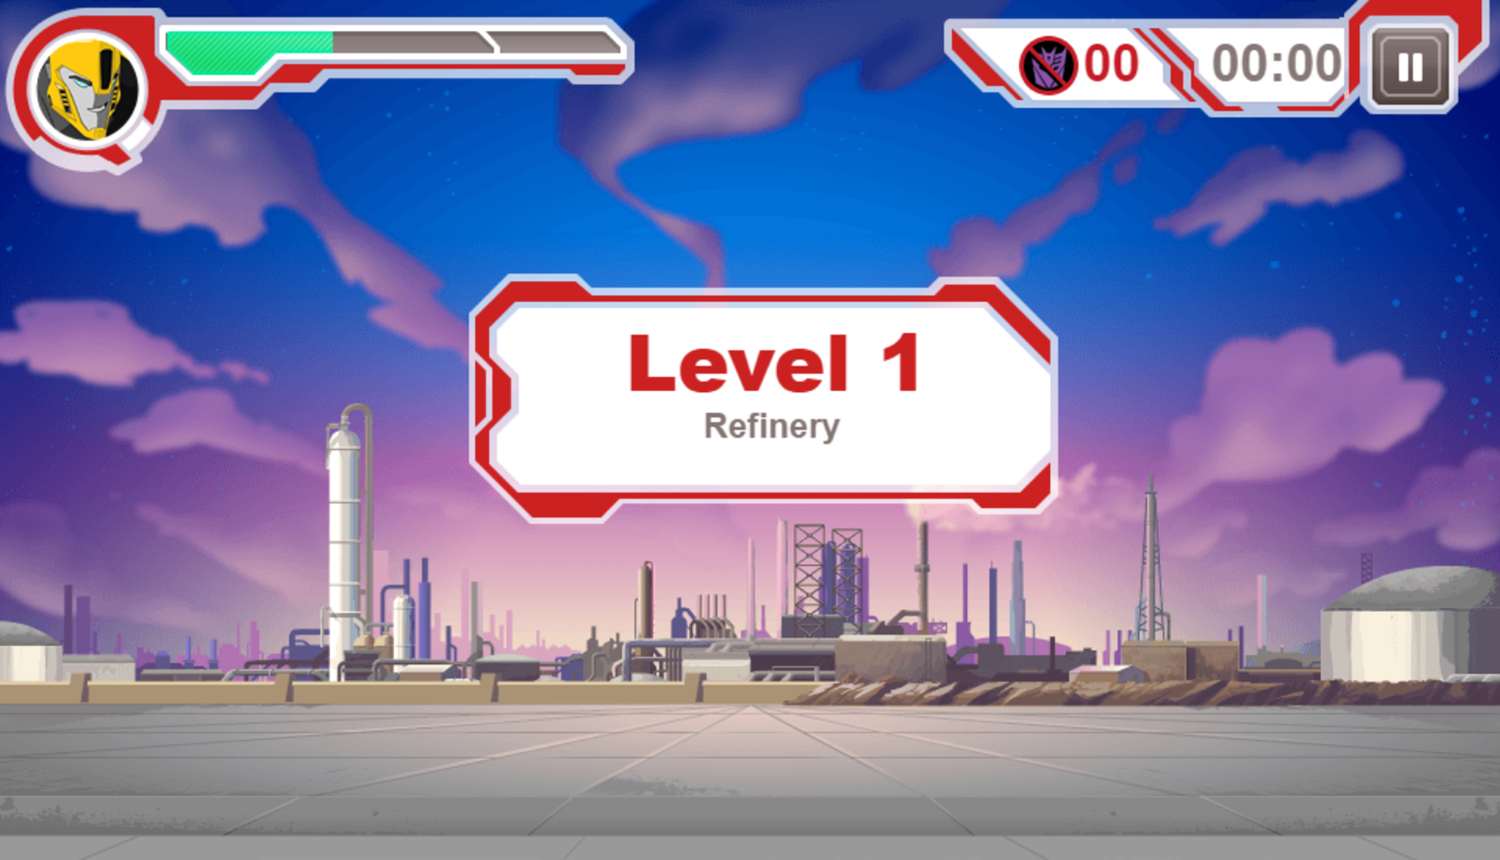 Transformers Protect Crown City Game Level Start Screenshot.